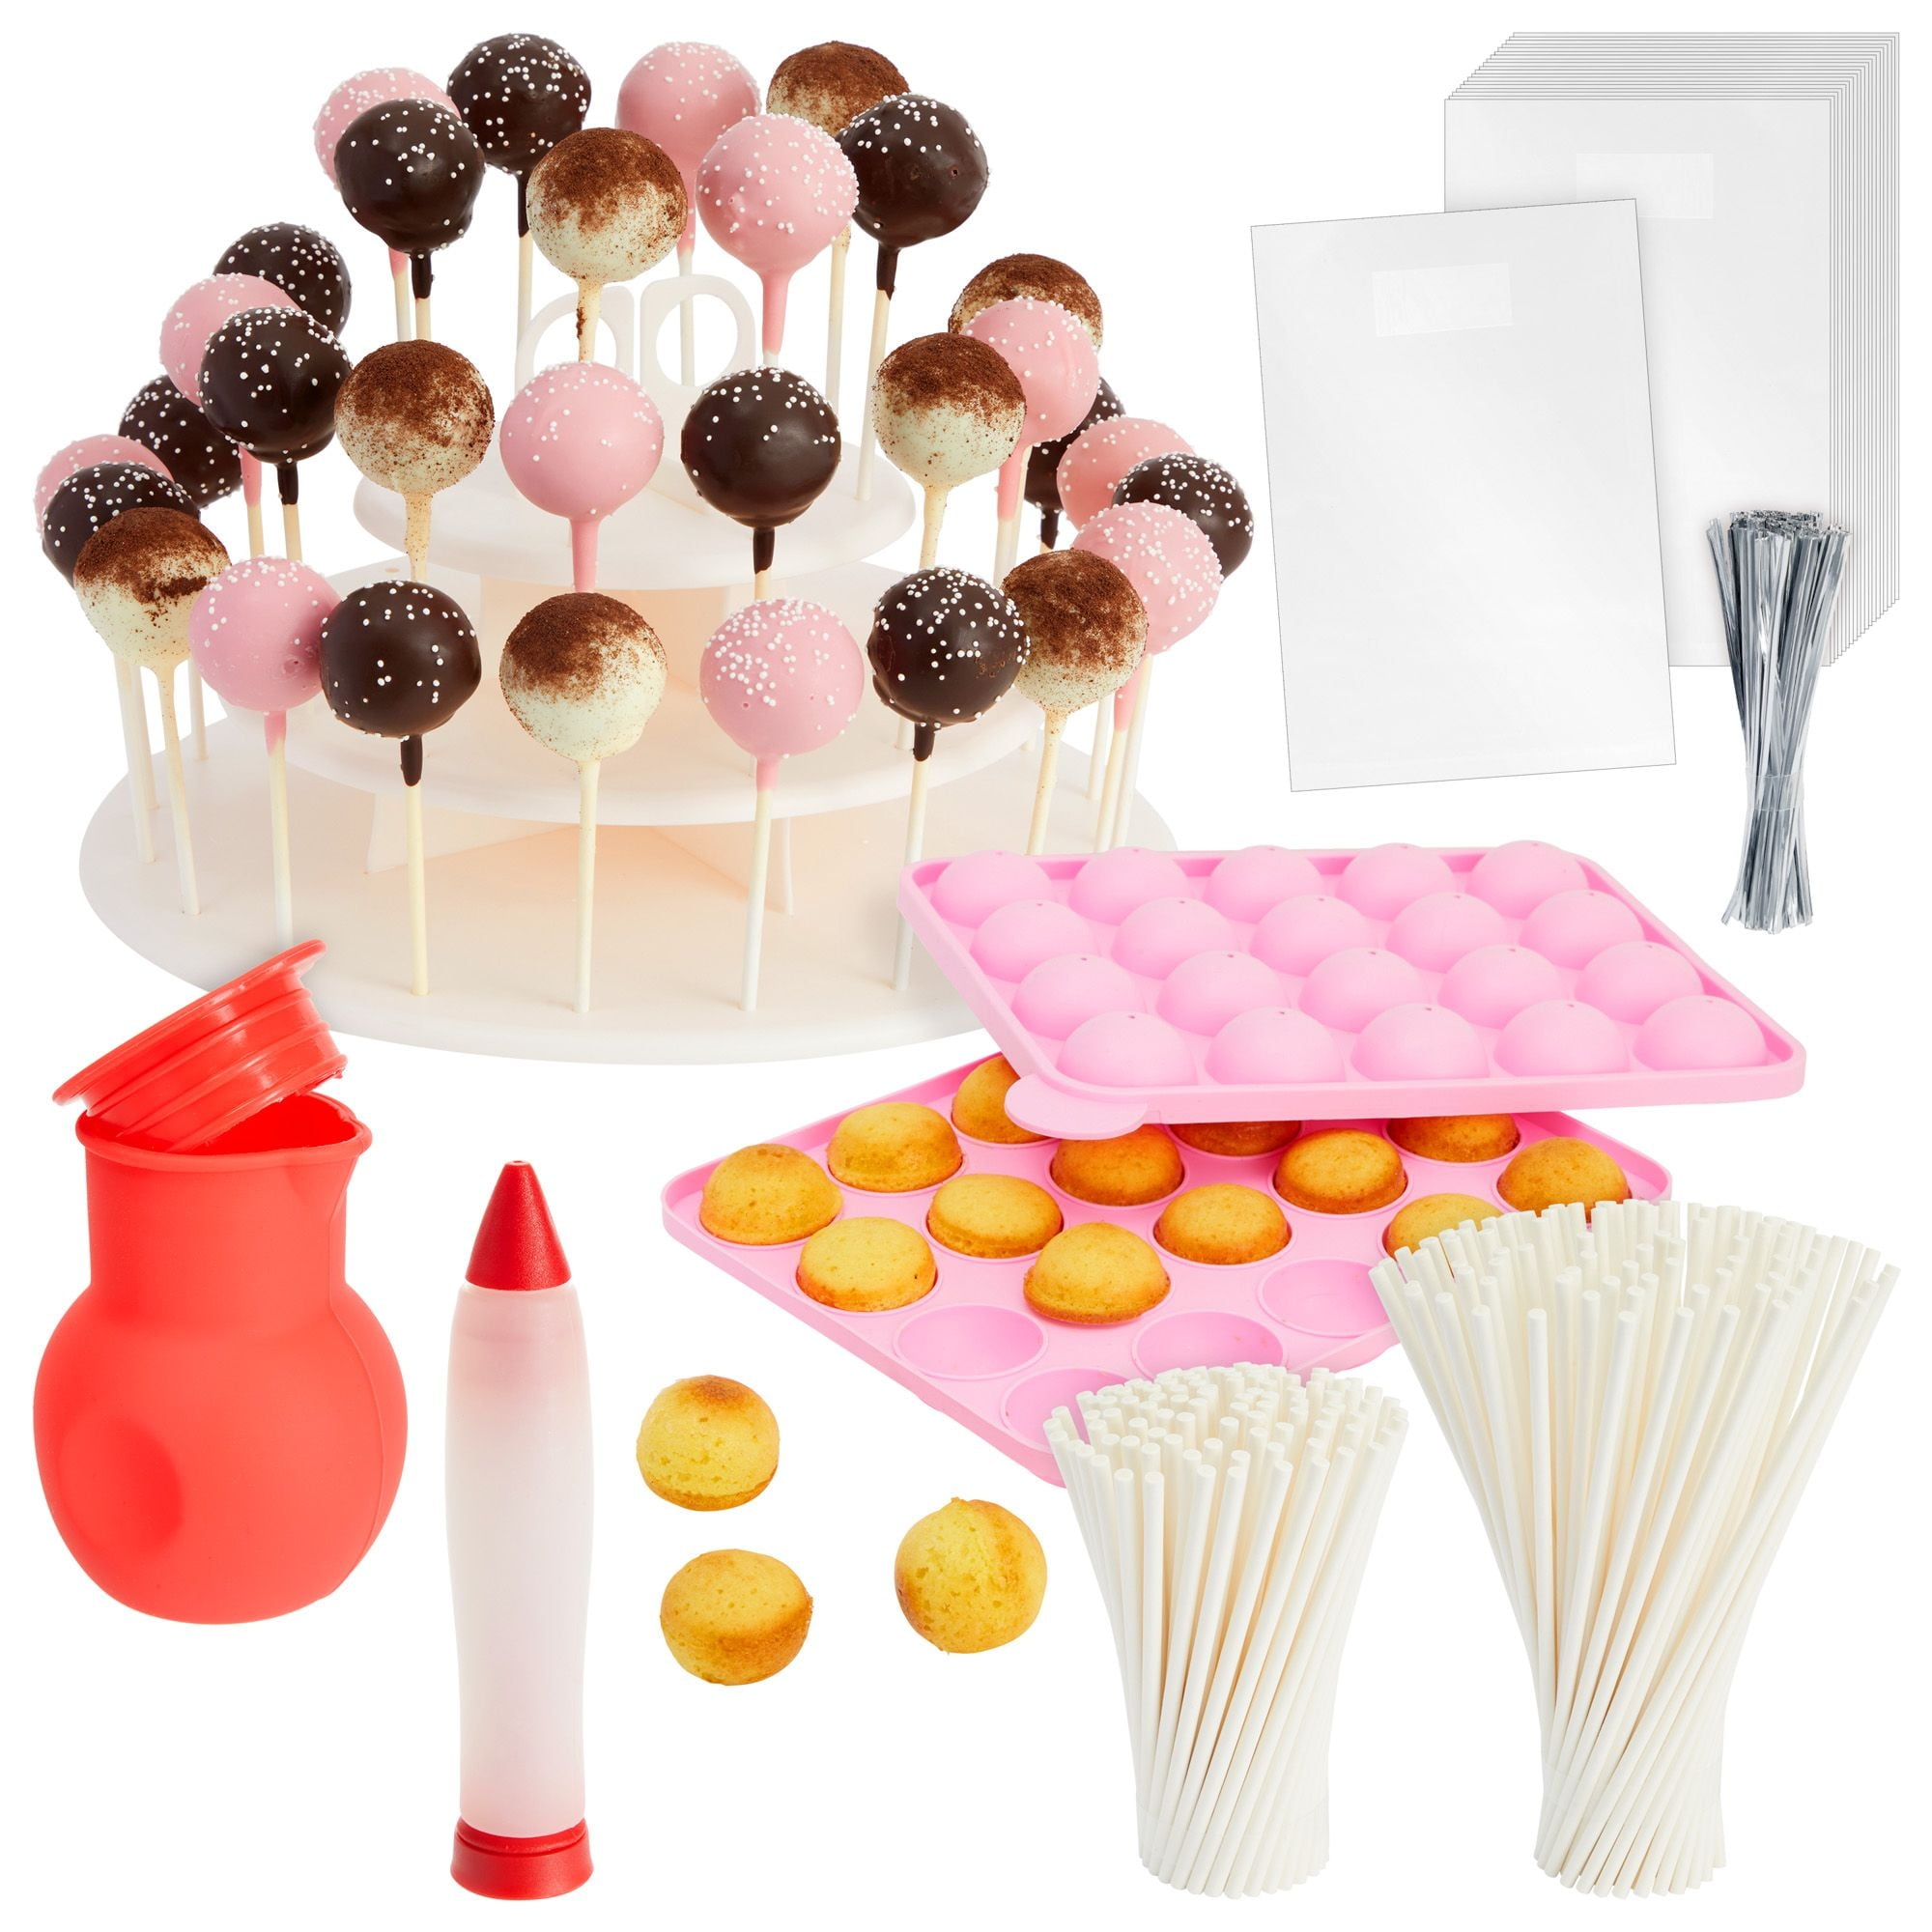 Kucoele Cake Pop Maker Set, 12 Cavity Silicone Cake Pop Mold with15 Hole  Clear Acrylic Lollipop Display Stand Holder, Sticks Treats Bags and Twist